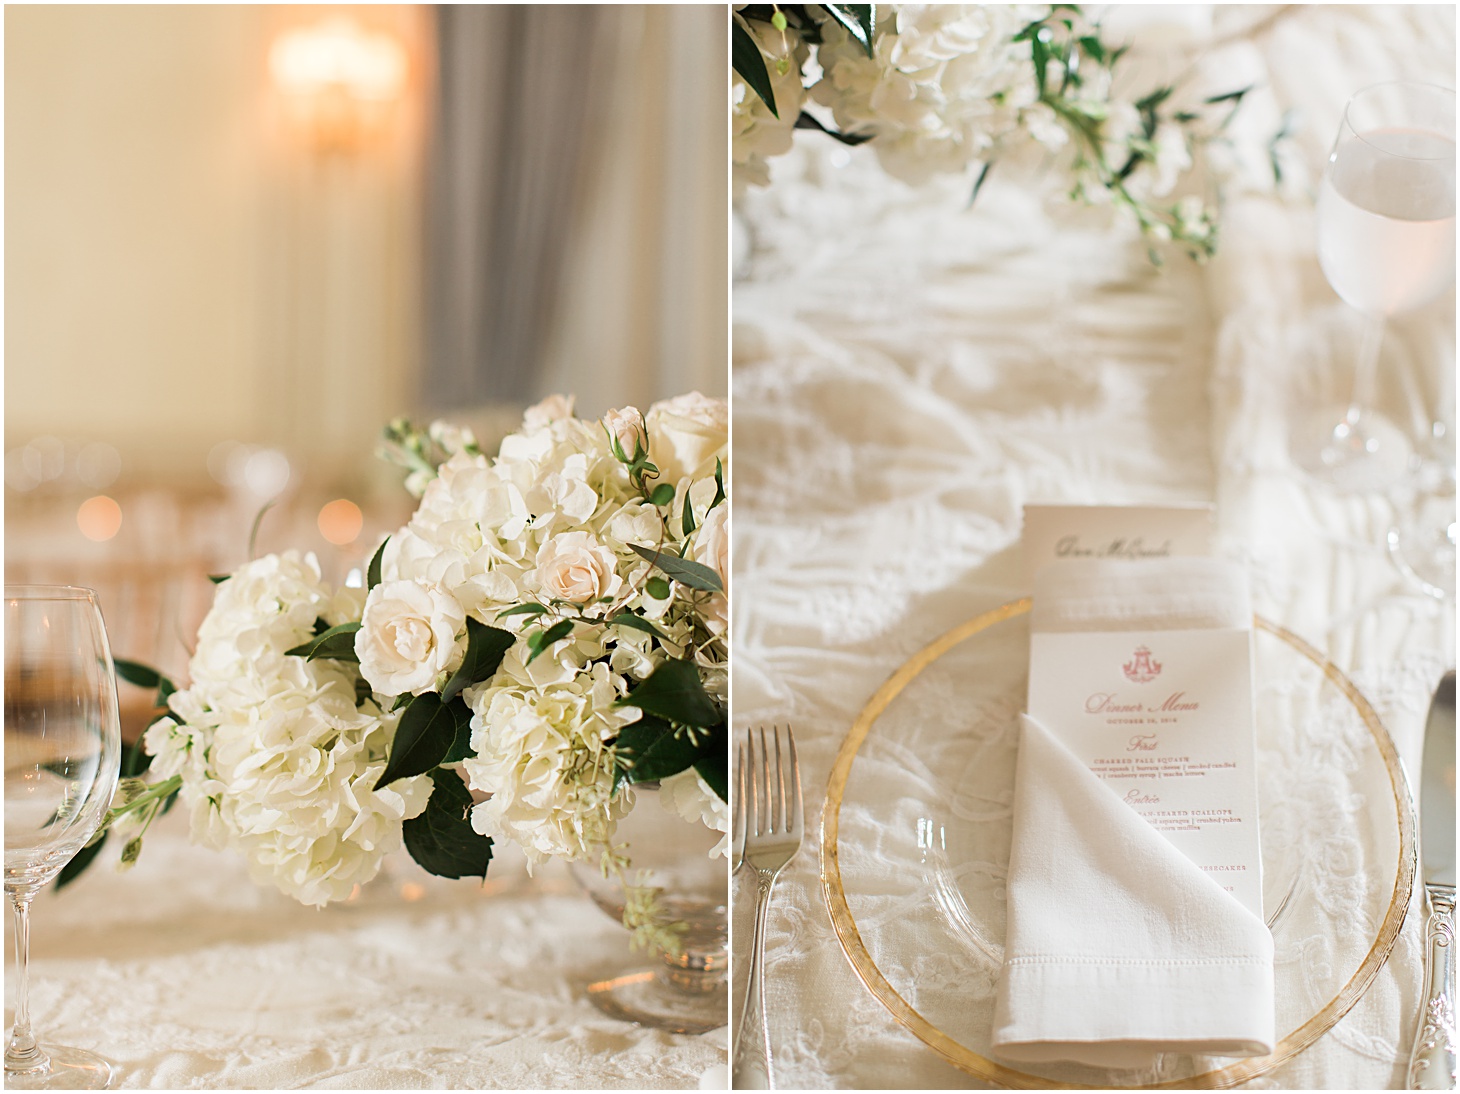 Flowers by The Enchanted Florist, Catering by Design Cuisine, Linens by DC Rentals - A Thoroughly Washingtonian Wedding at Meridian House in DC by Sarah Bradshaw 